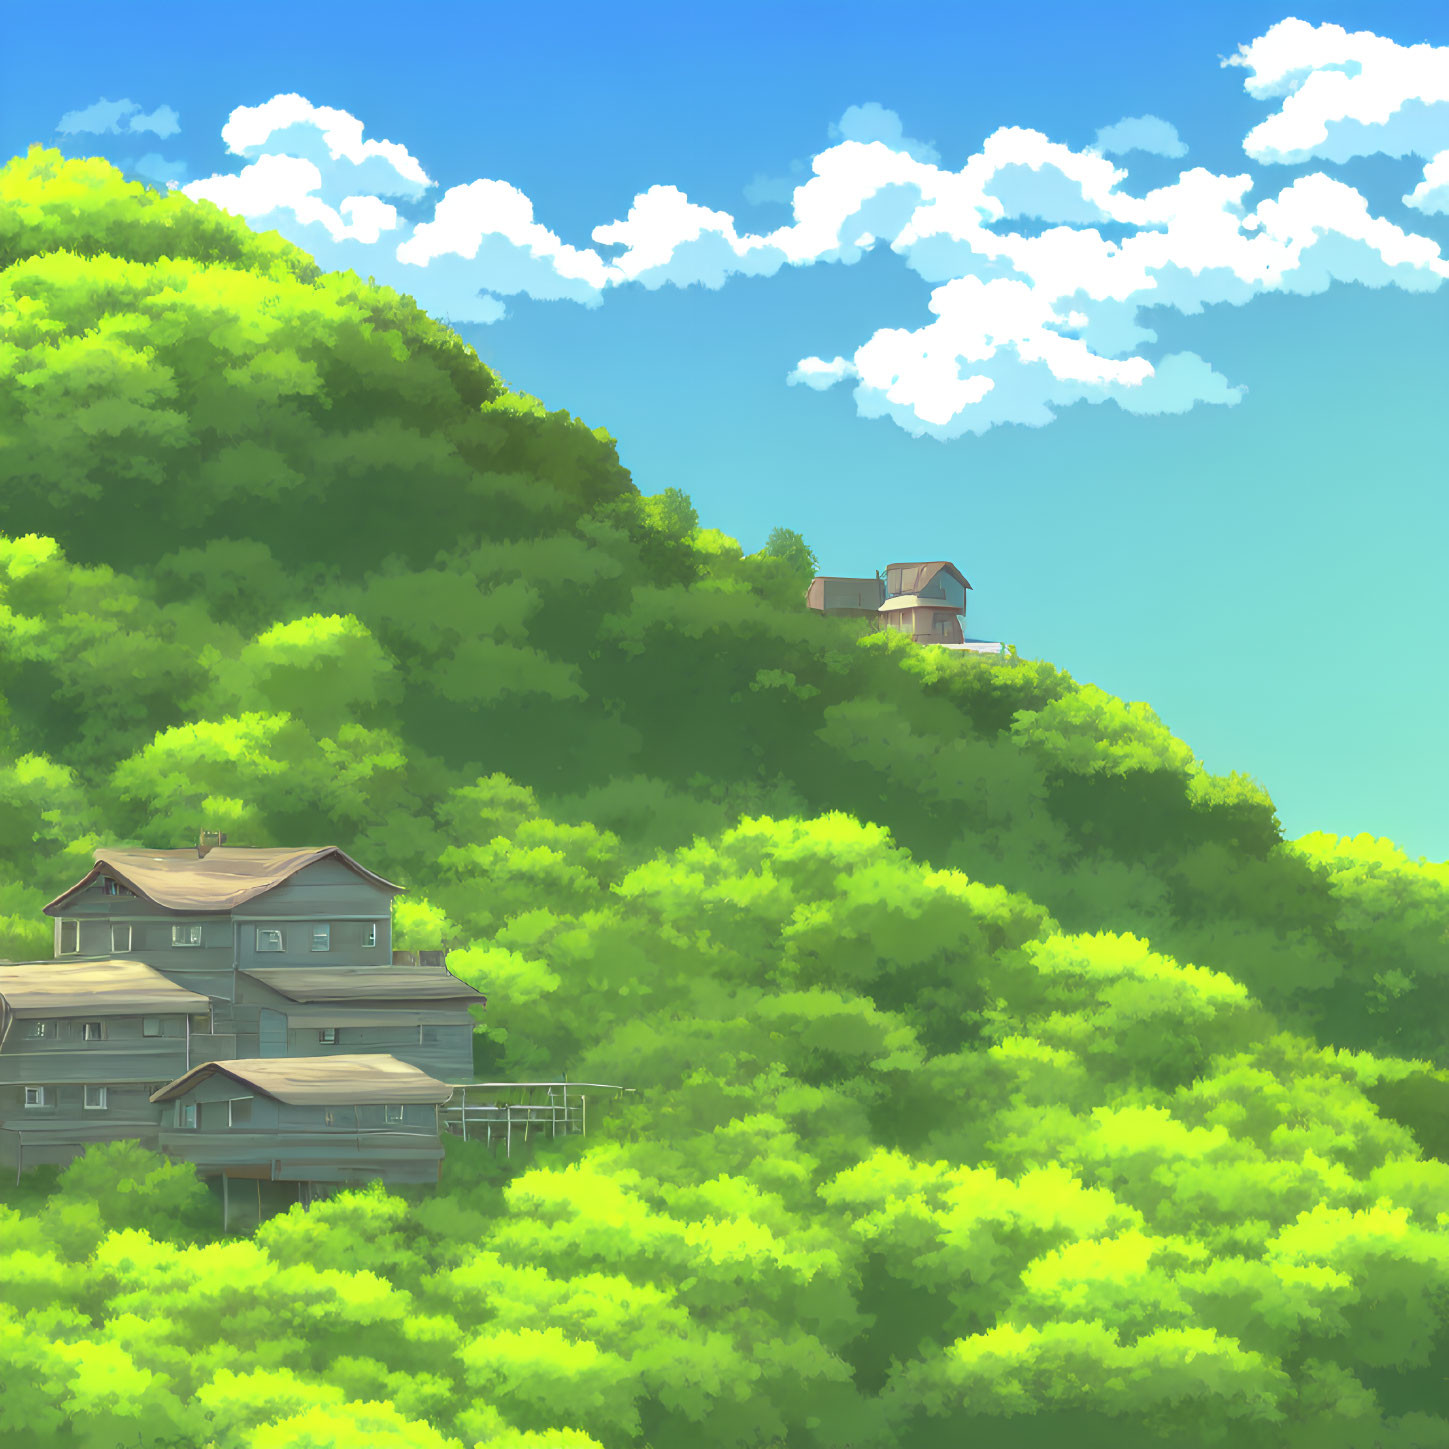 Tranquil houses in lush green hills under clear blue sky